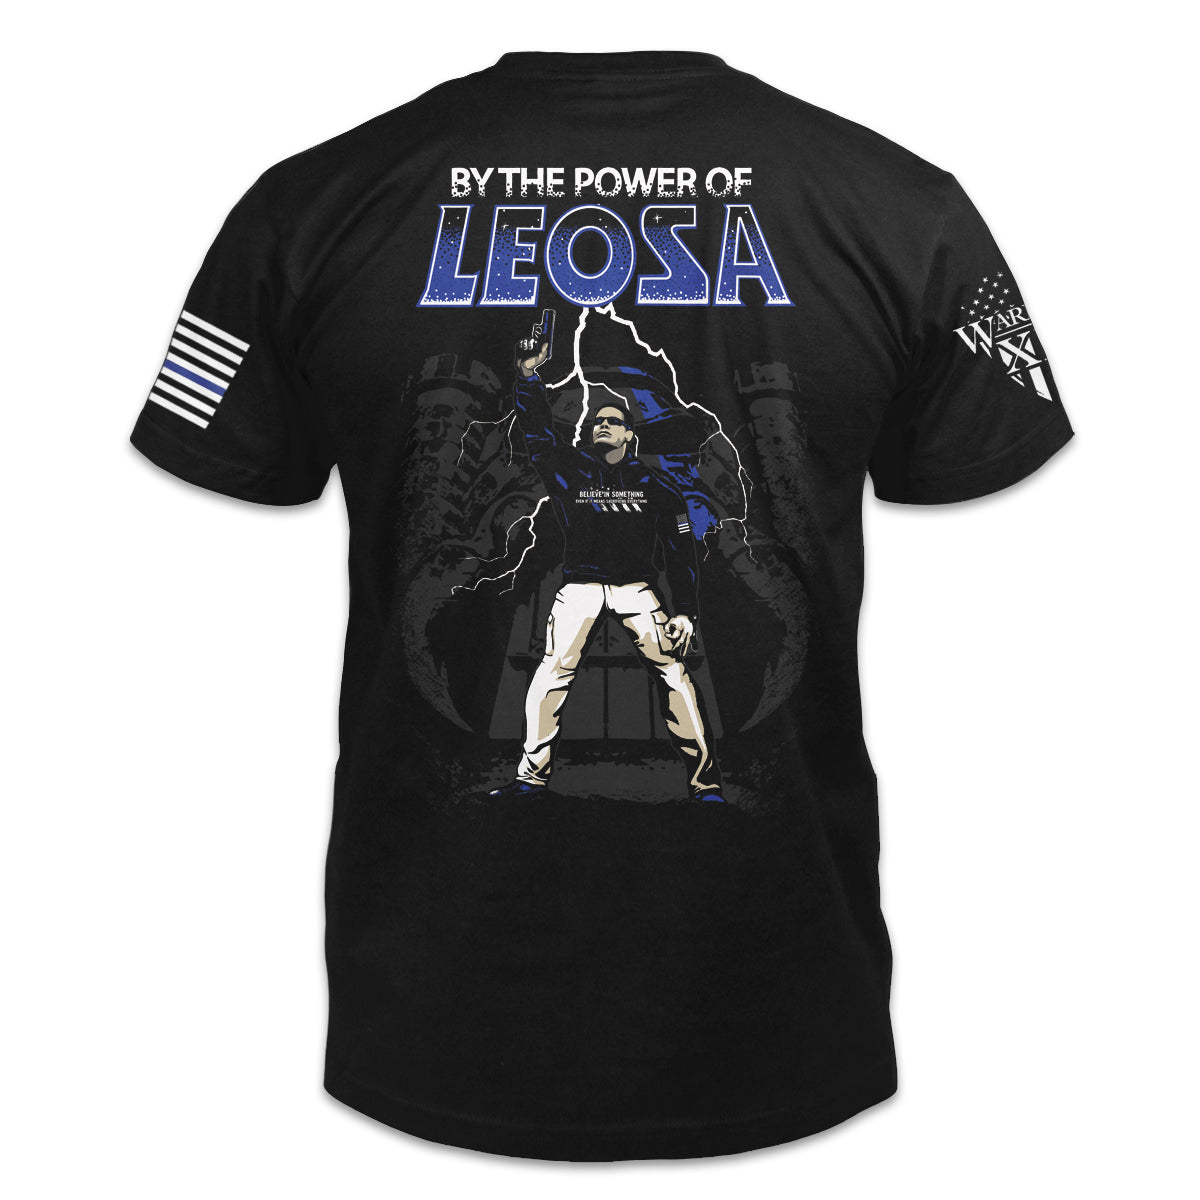 By The Power Of LEOSA Shirt